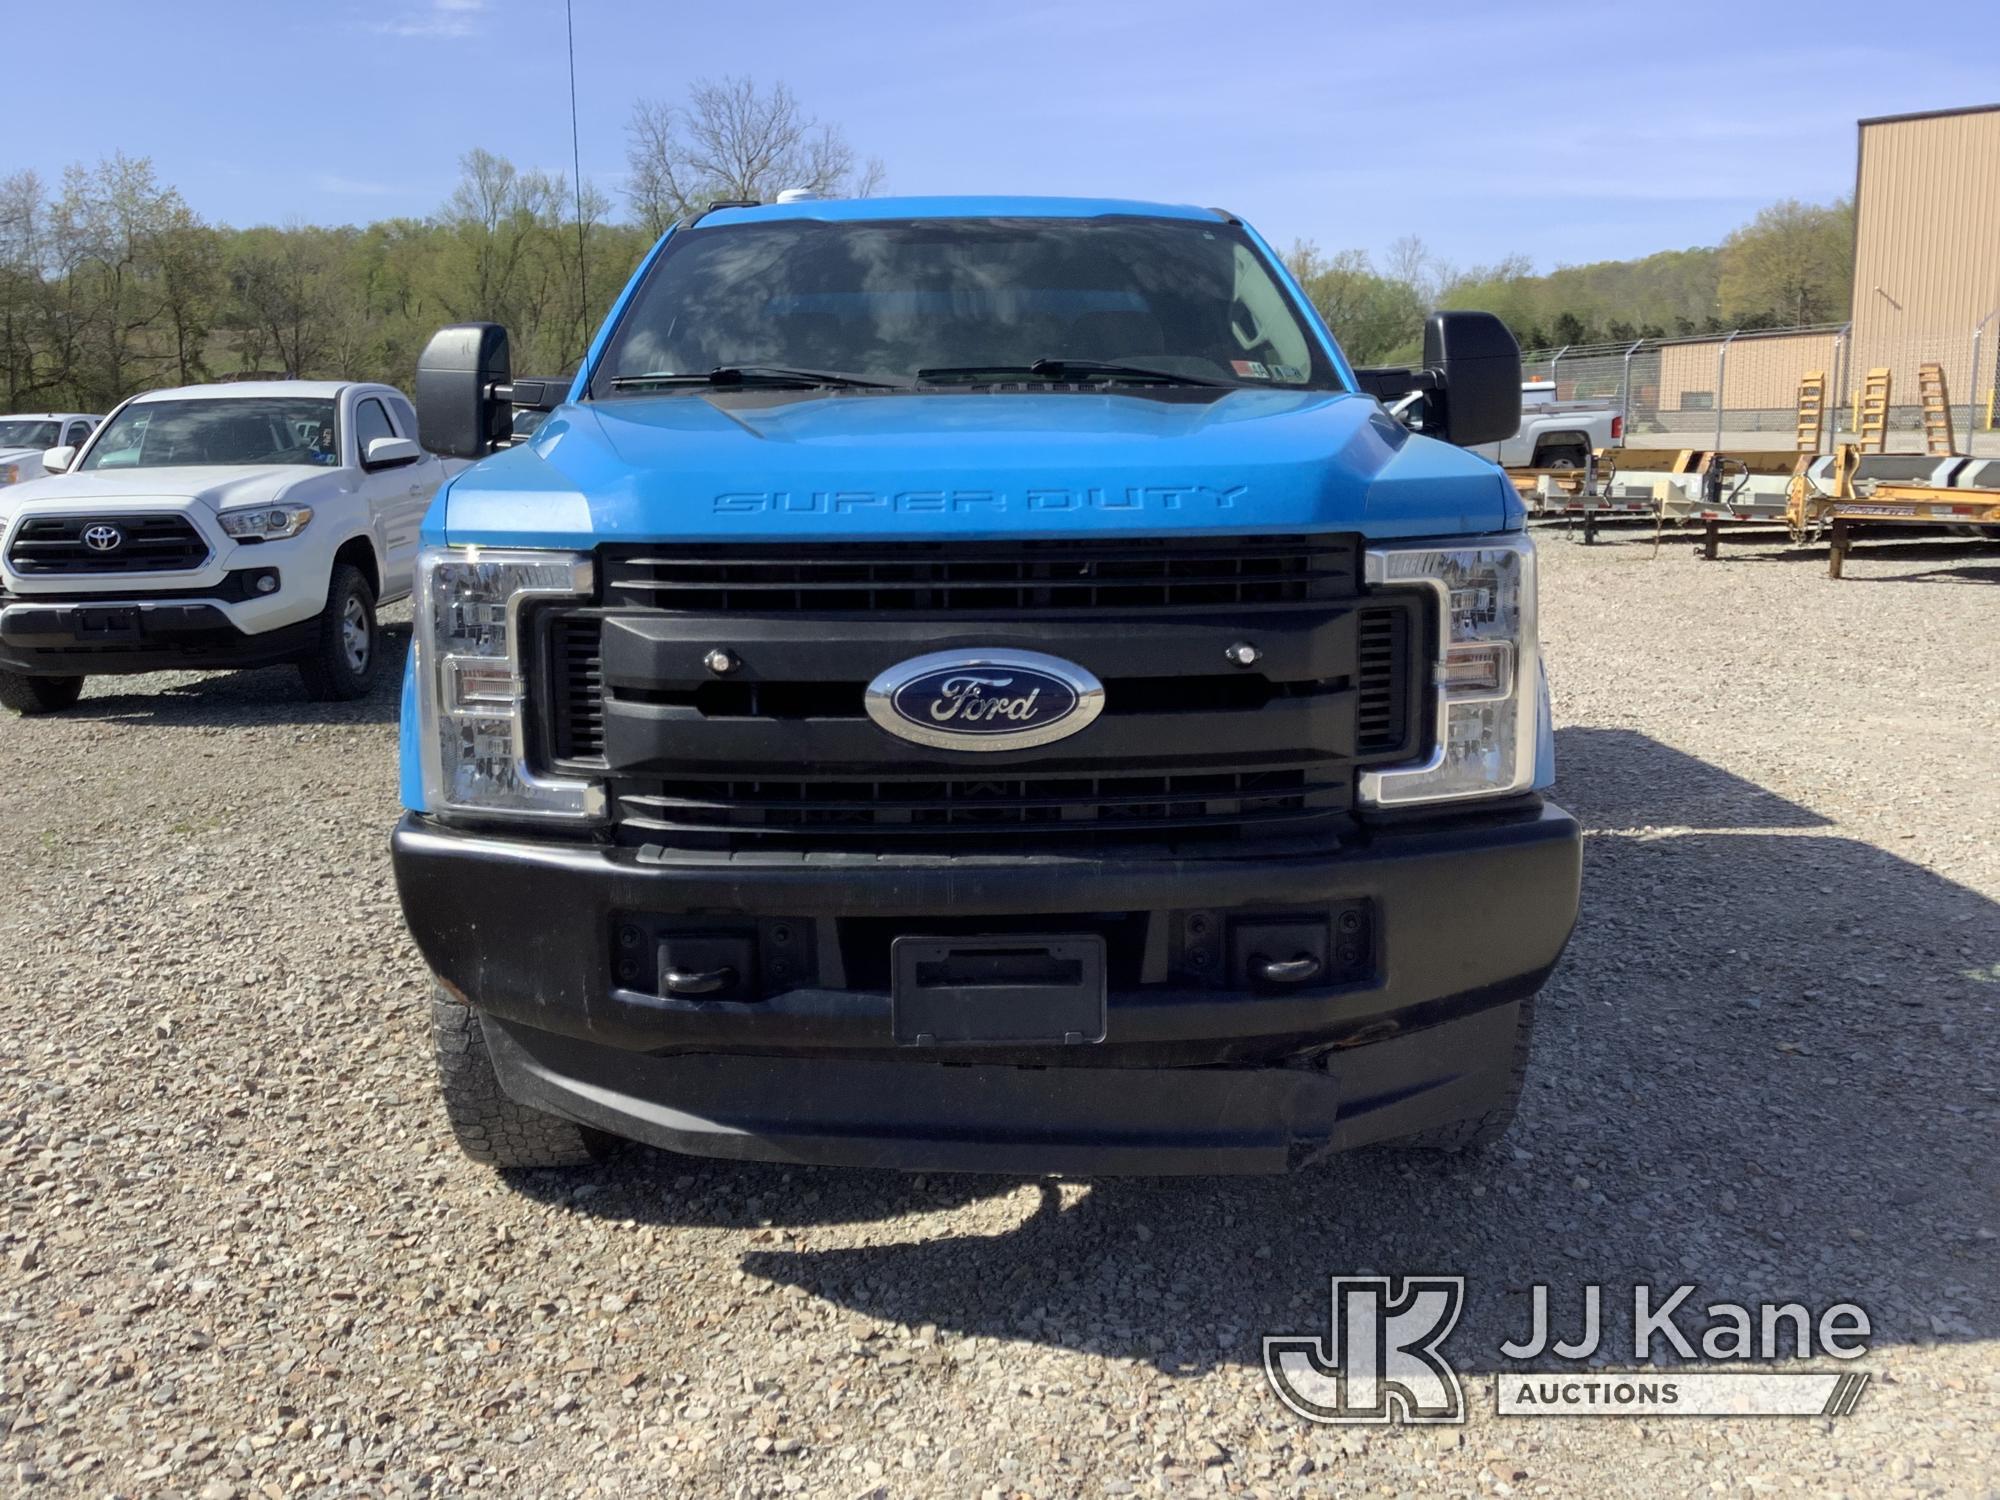 (Smock, PA) 2018 Ford F250 4x4 Extended-Cab Enclosed Service Truck Runs & Moves, Check Engine Light